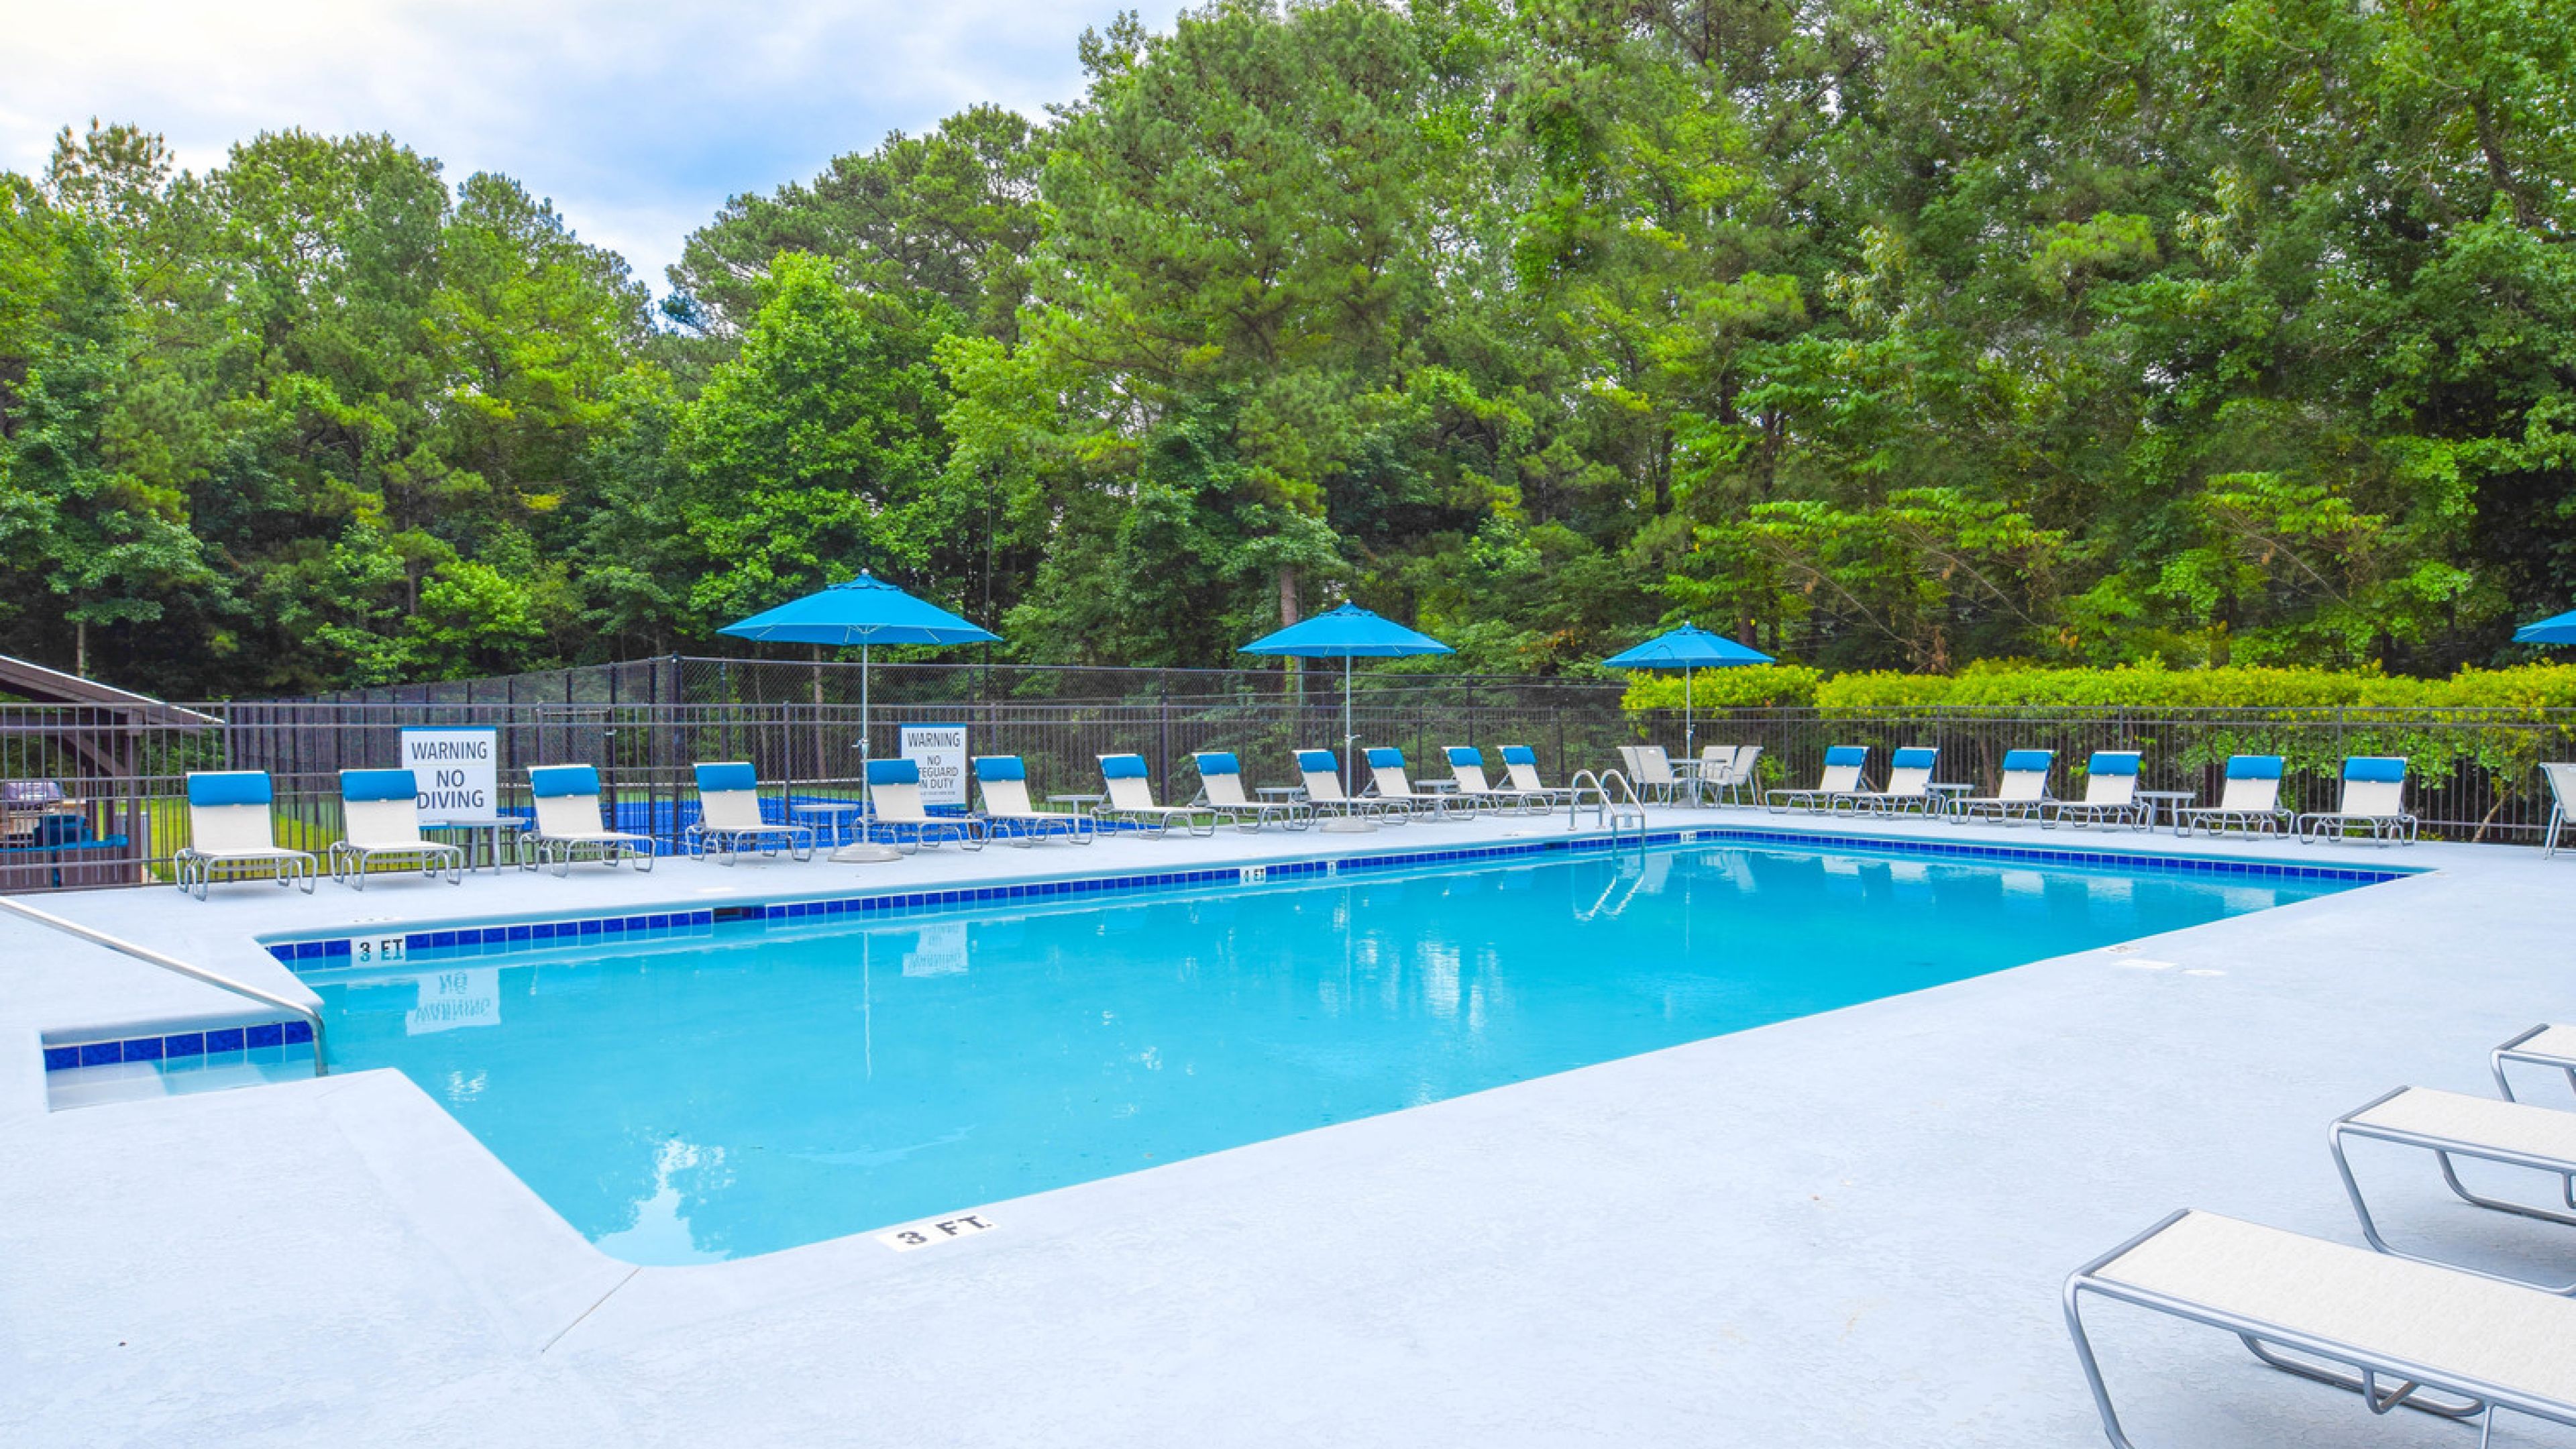 Hawthorne at Wisteria outdoor pool with surrounding seating, tables, and umbrellas